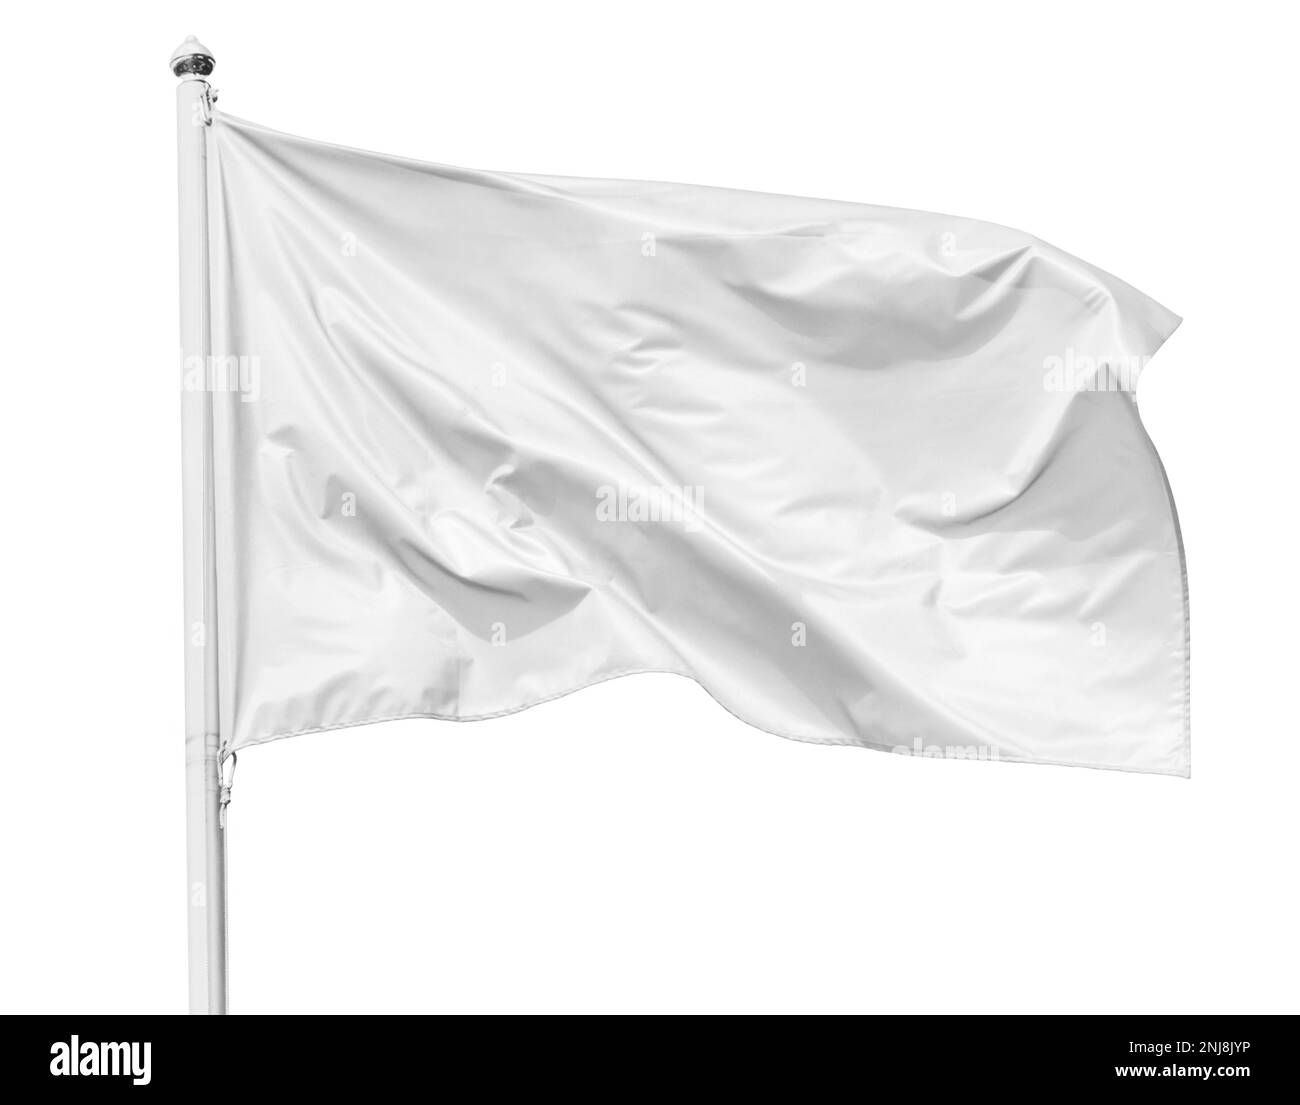 White flag waving in the wind on flagpole, isolated on white background, closeup Stock Photo